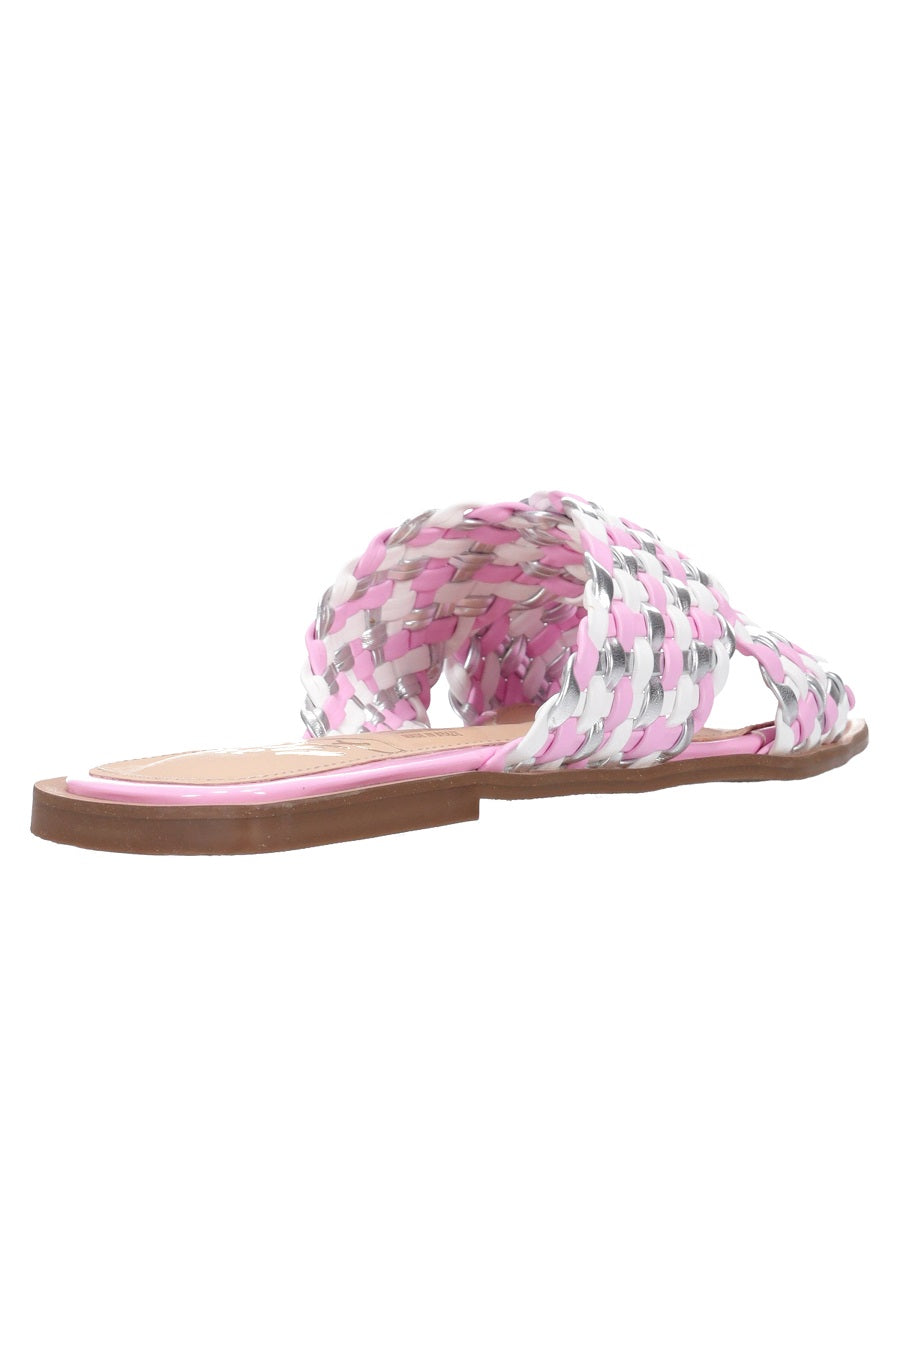 HEY MON Briony Pink/Wh Slide